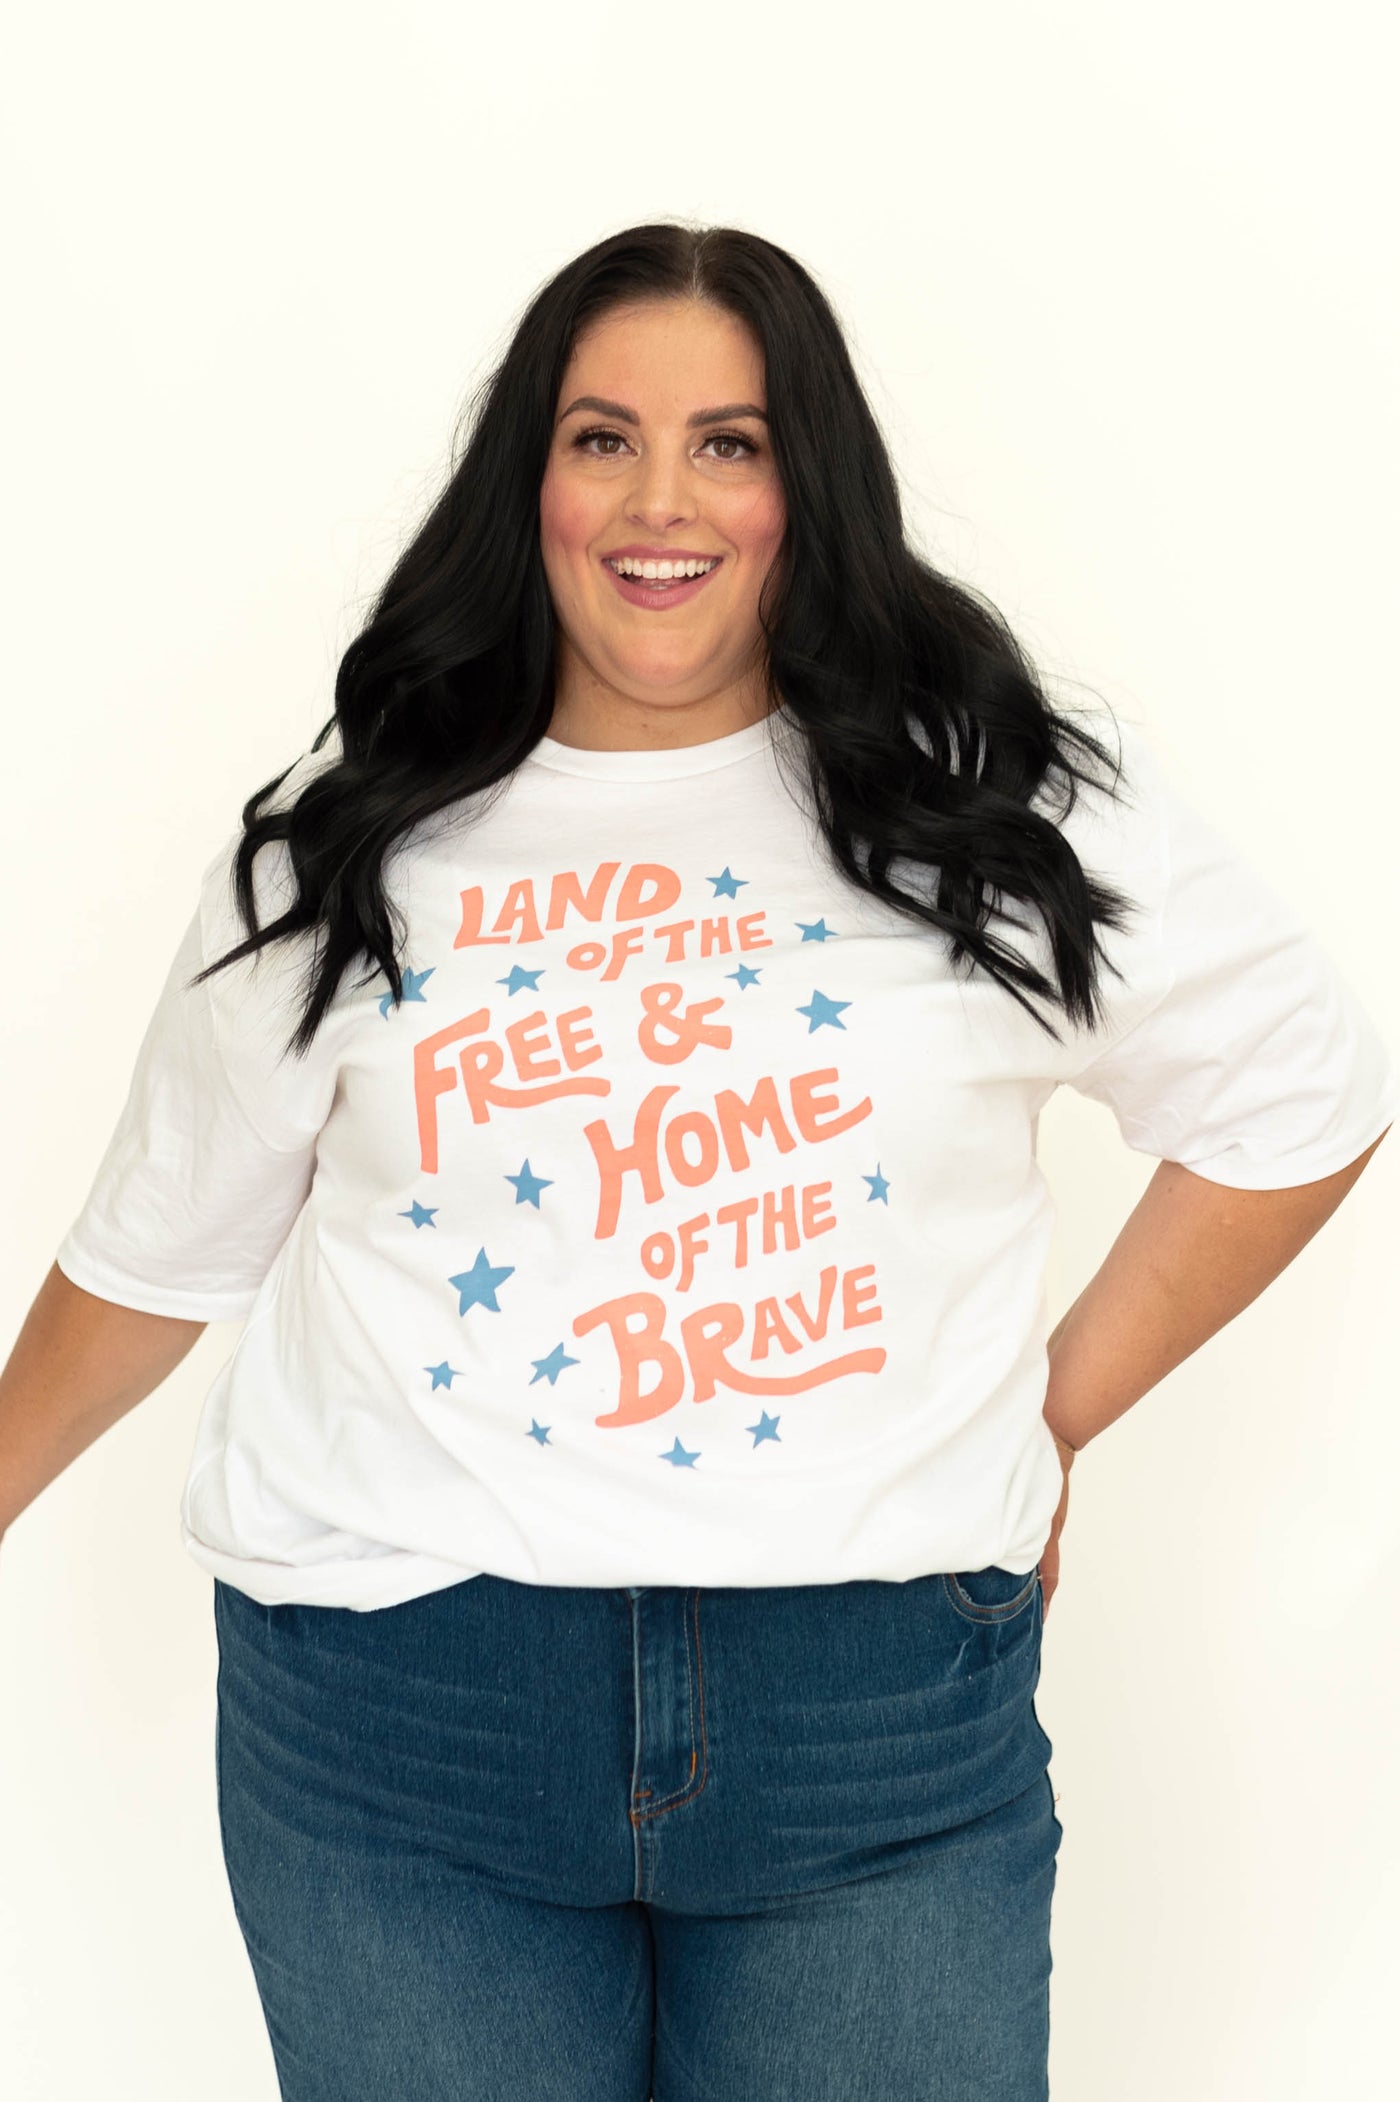 Plus size of home of the free land of the brave white tee